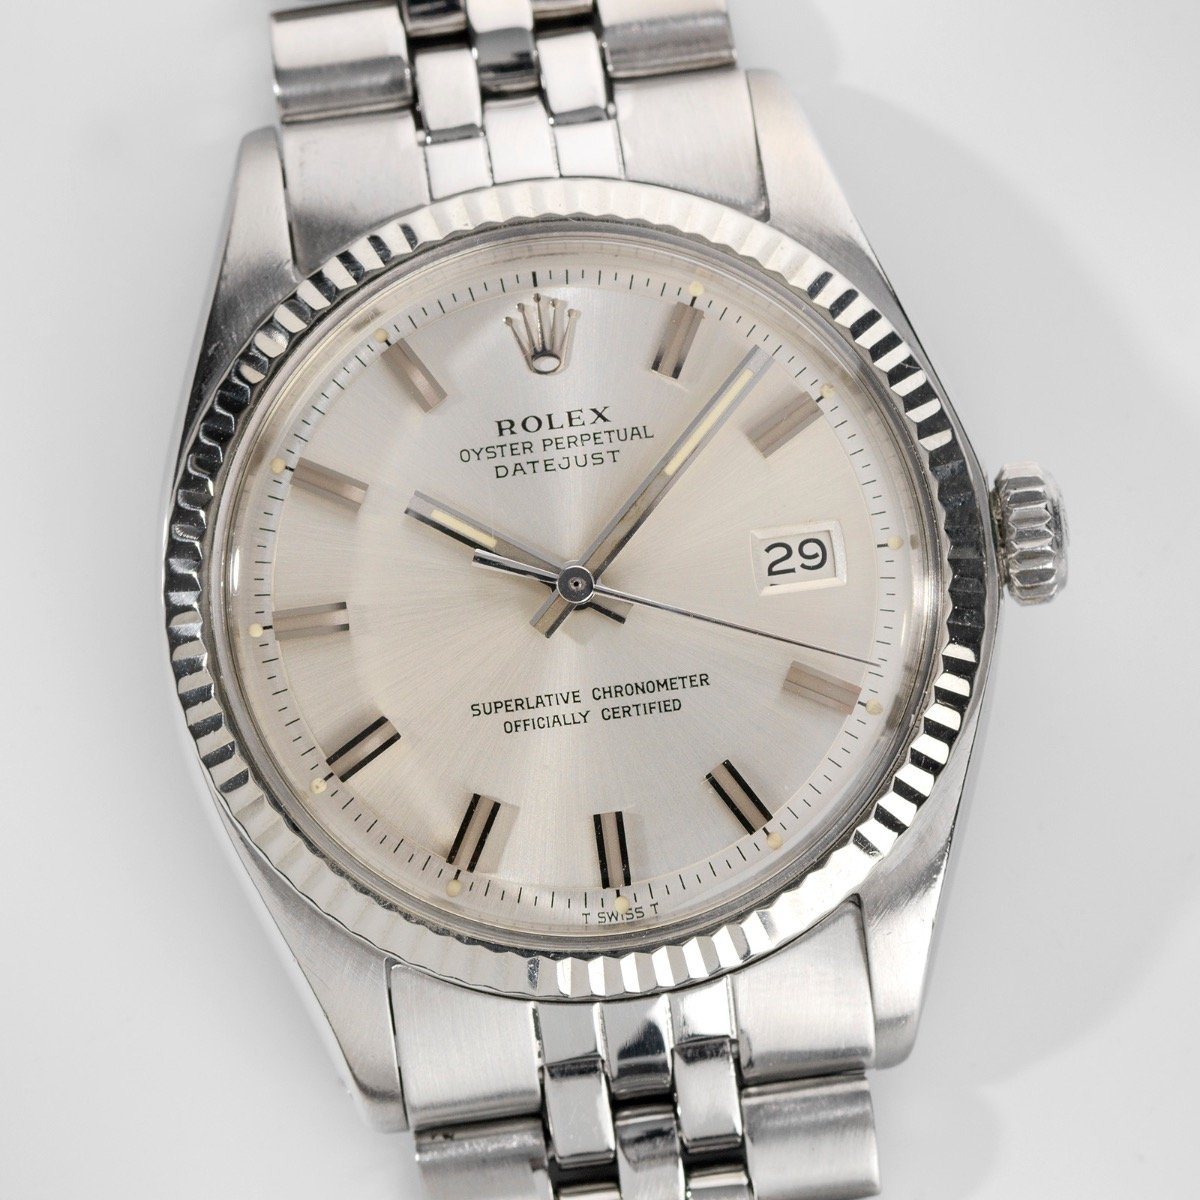 Rolex Datejust Reference 1601 Wide Boy Dial